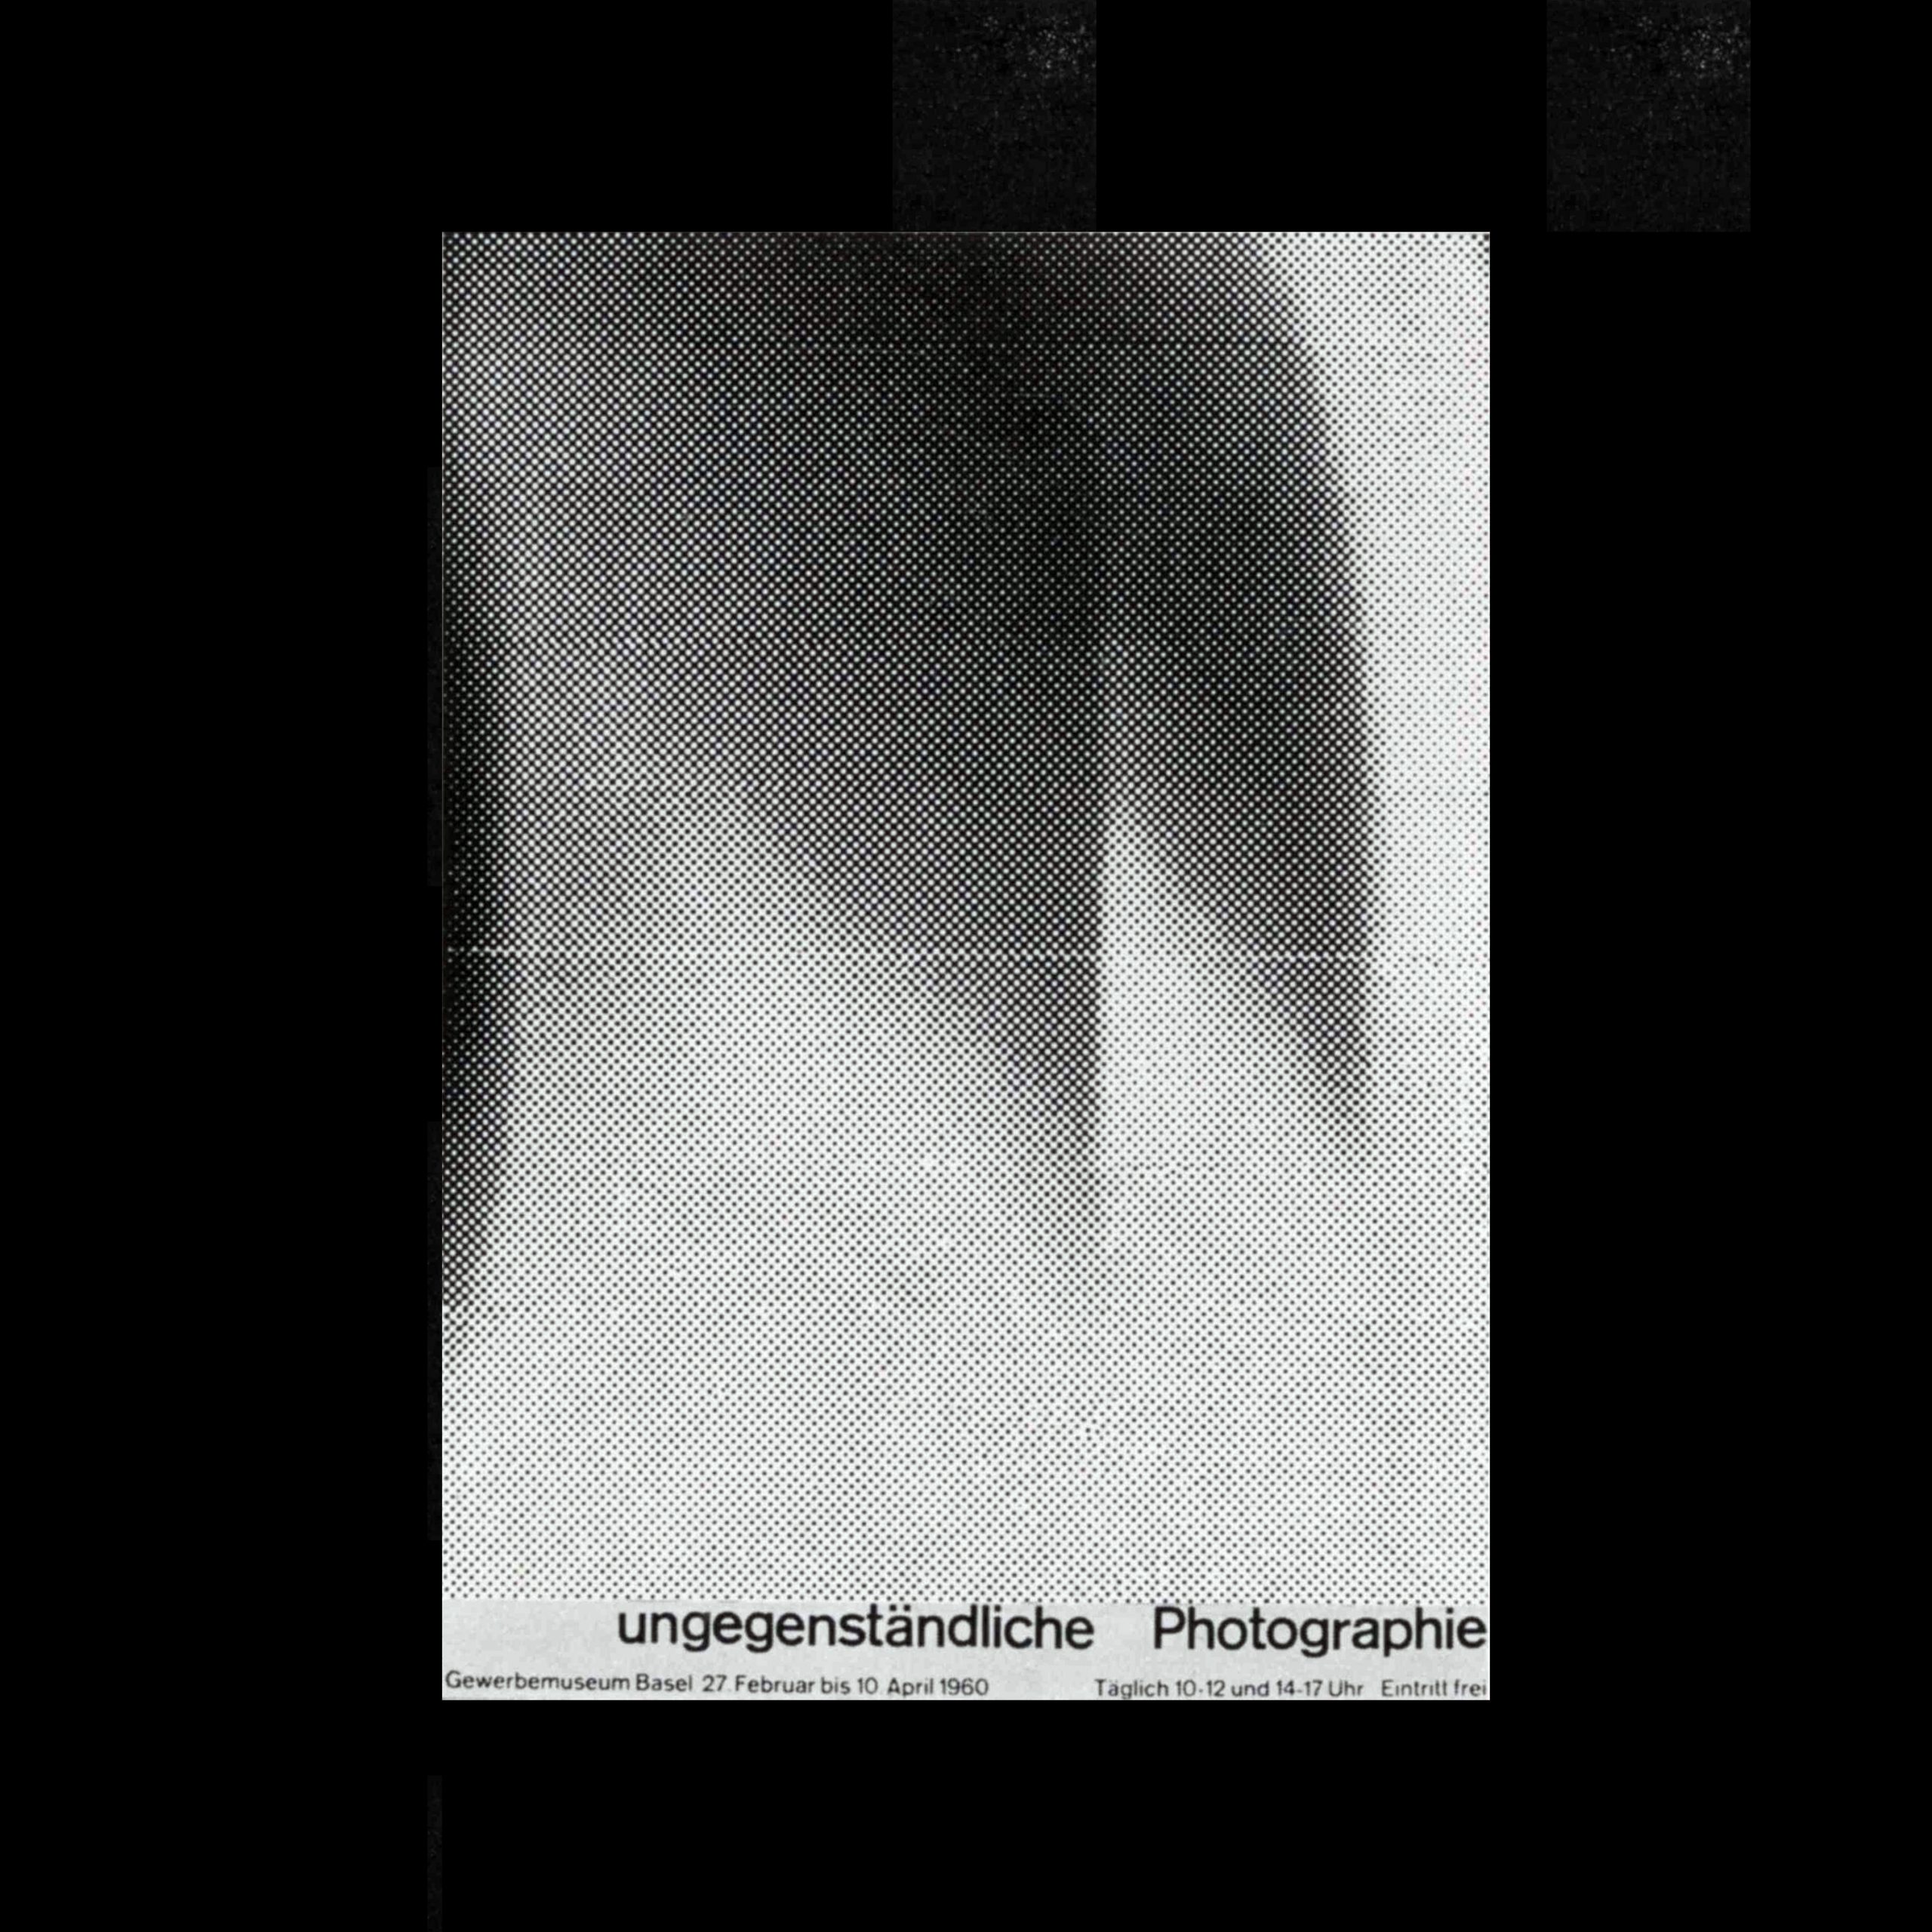 Poster for the exhibition, Non-Objective Photography at the Gewerbemuseum, Basel designed by Email Ruder